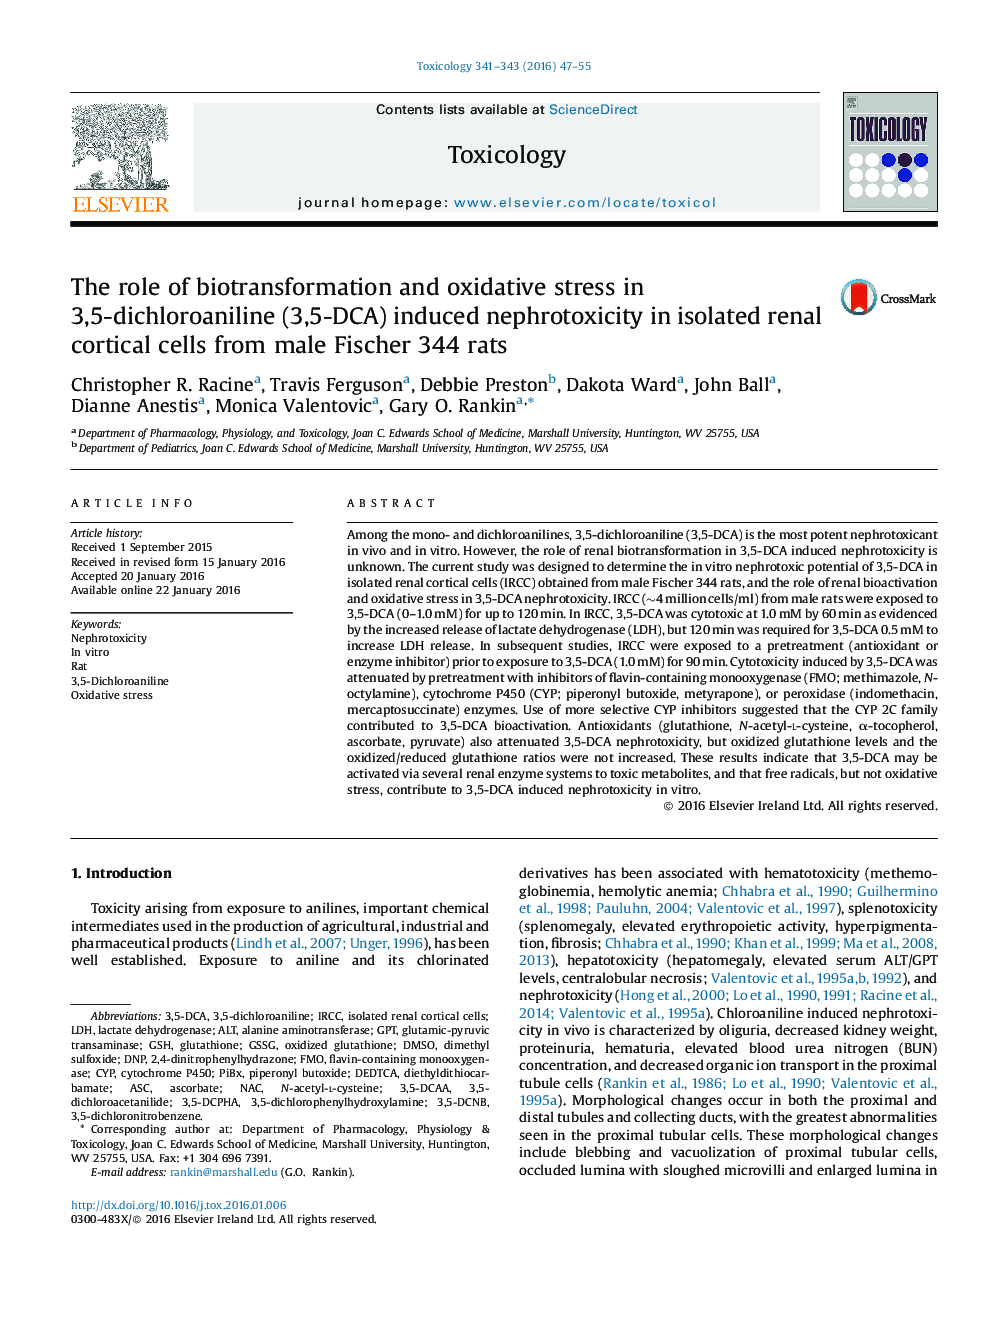 The role of biotransformation and oxidative stress in 3,5-dichloroaniline (3,5-DCA) induced nephrotoxicity in isolated renal cortical cells from male Fischer 344 rats